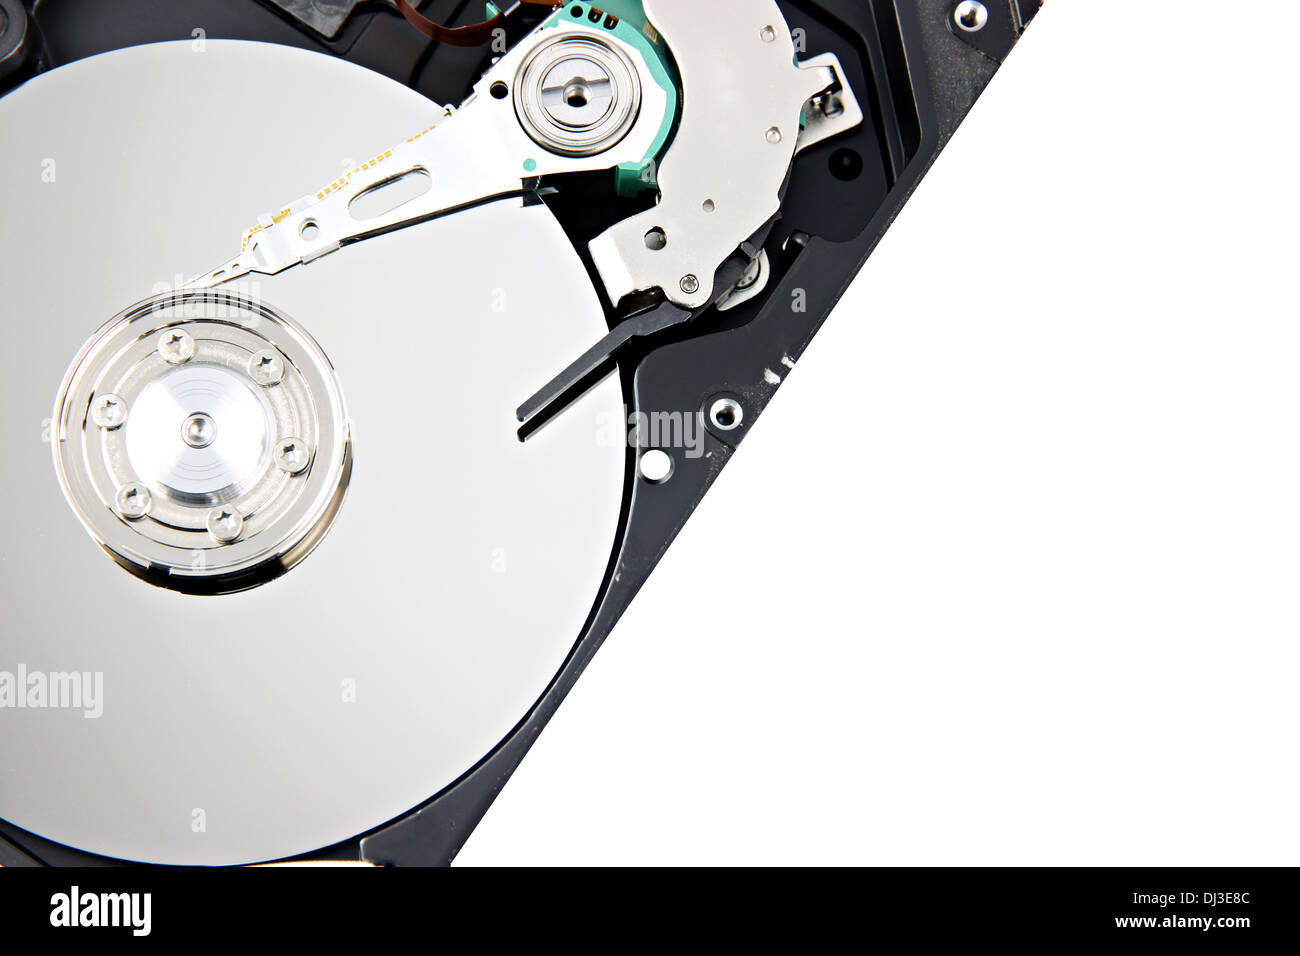 Open The Hard disk and focus picture in Disk storage on white background. Stock Photo